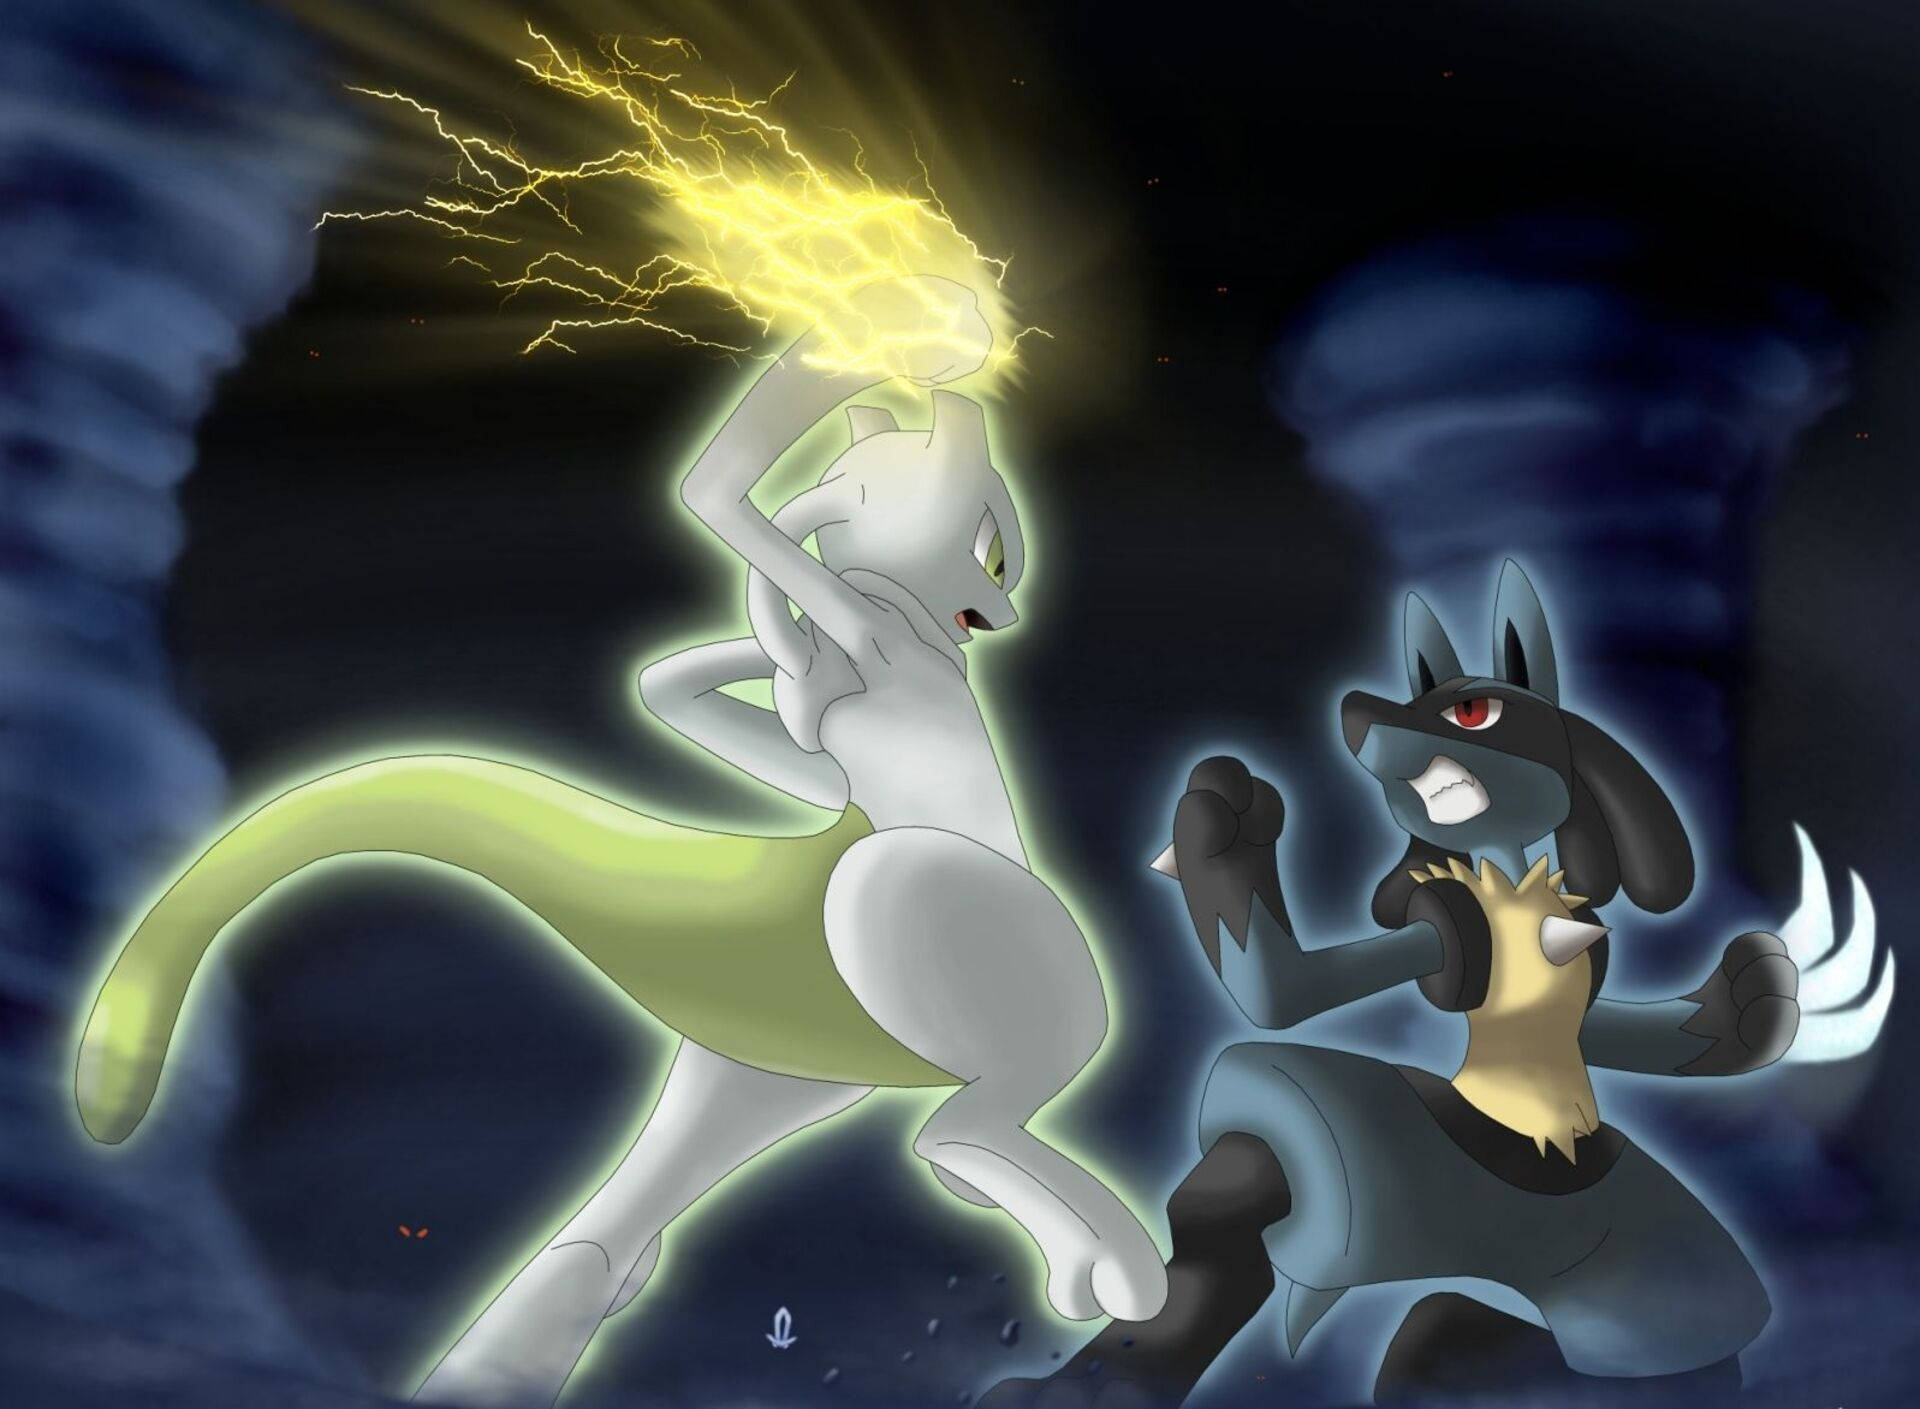 Mewtwo Vs Lucario: A Battle For Supremacy Background